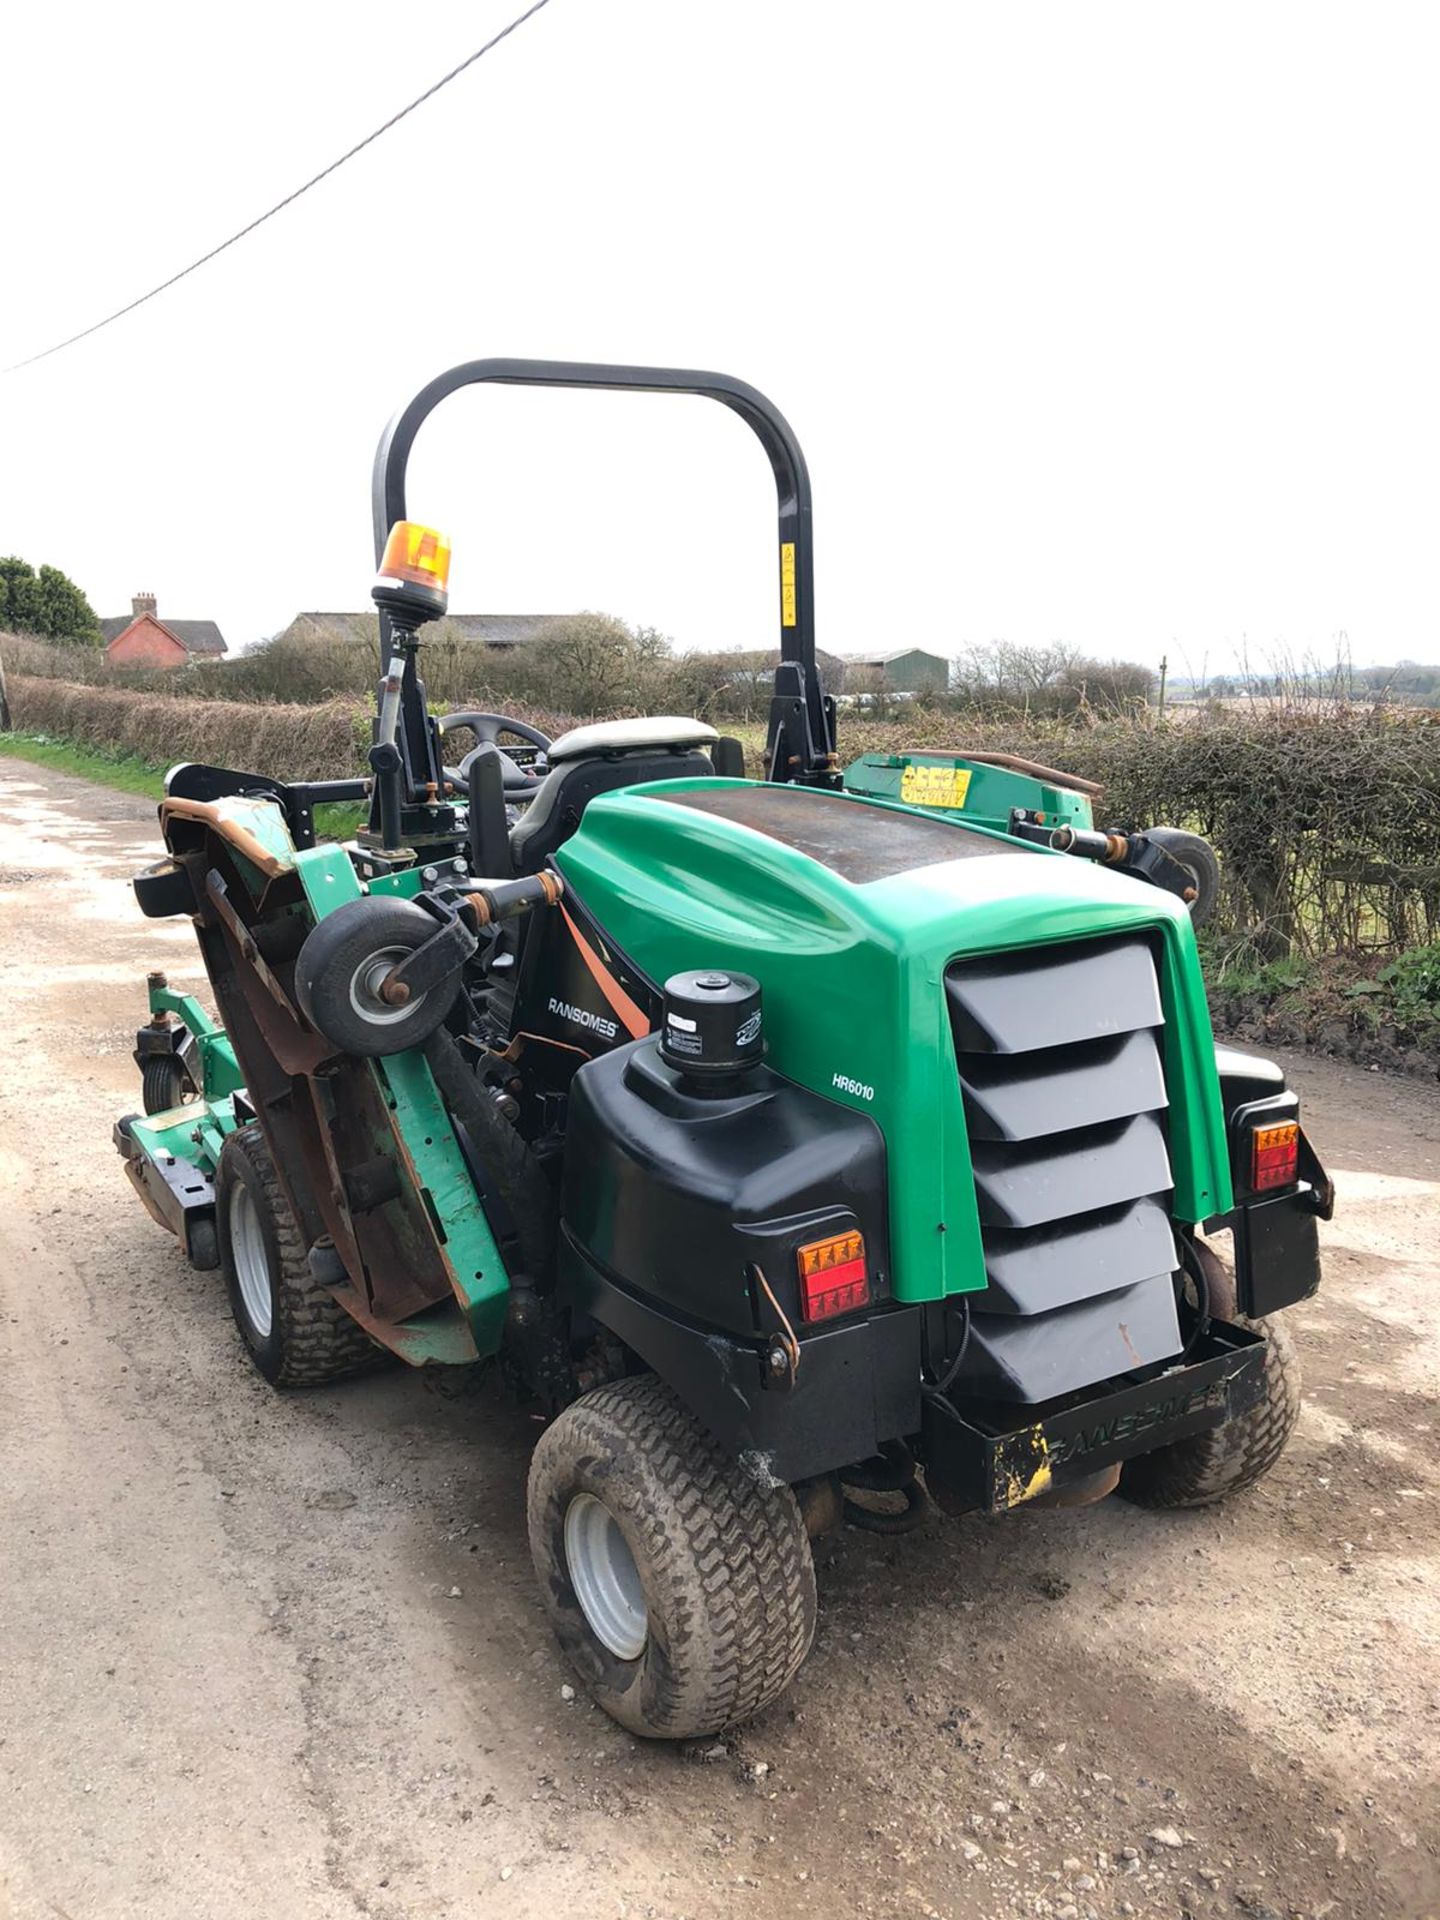 RANSOMES HR6010 BATWING RIDE ON LAWN MOWER, YEAR 2013/62 PLATE, 4 WHEEL DRIVE *PLUS VAT* - Image 3 of 5